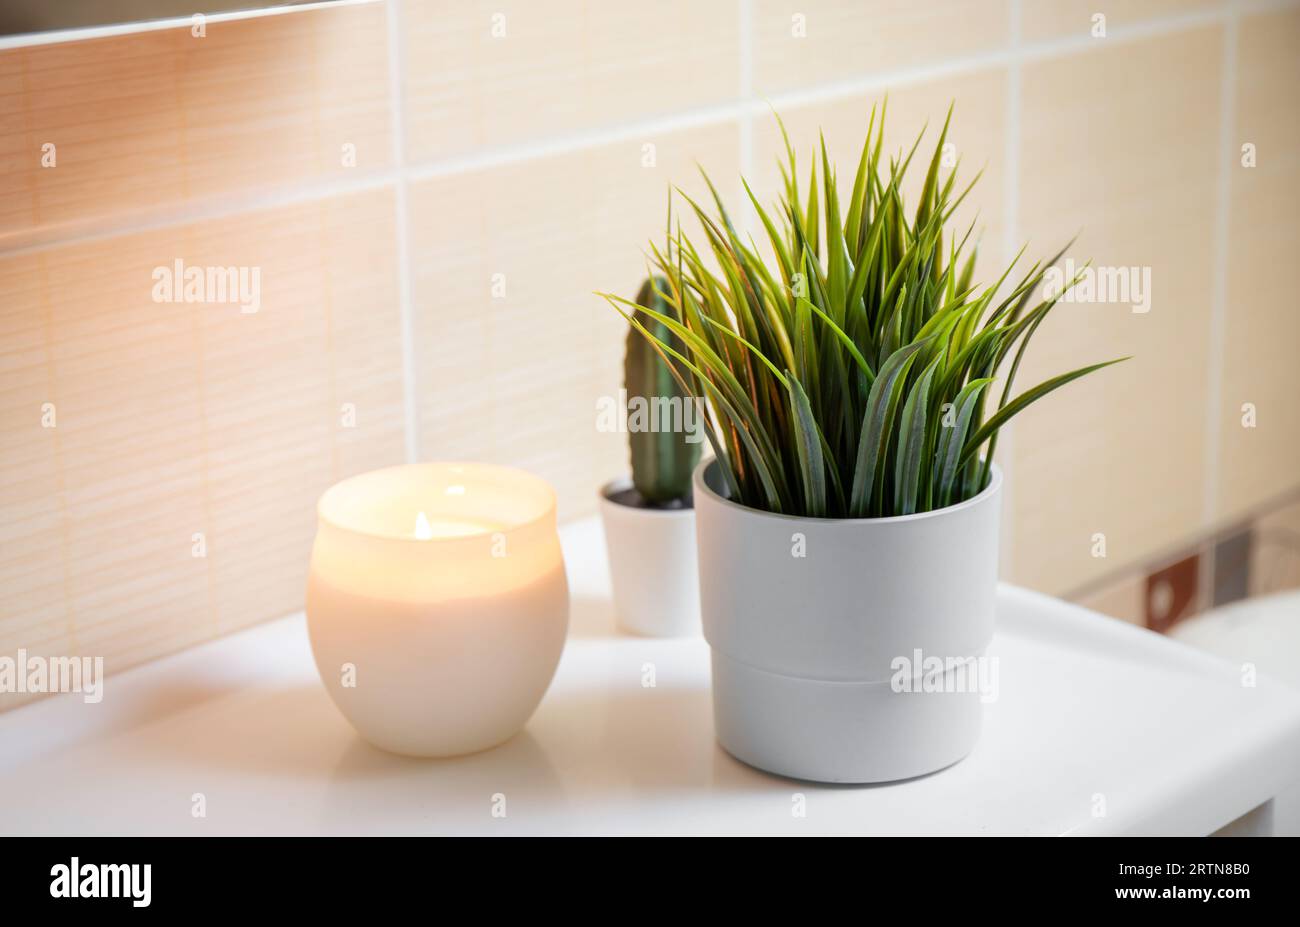 Using artificial flowers in bathroom interior at home. Potted flower plant on bathroom sink corner with candle burning. Stock Photo